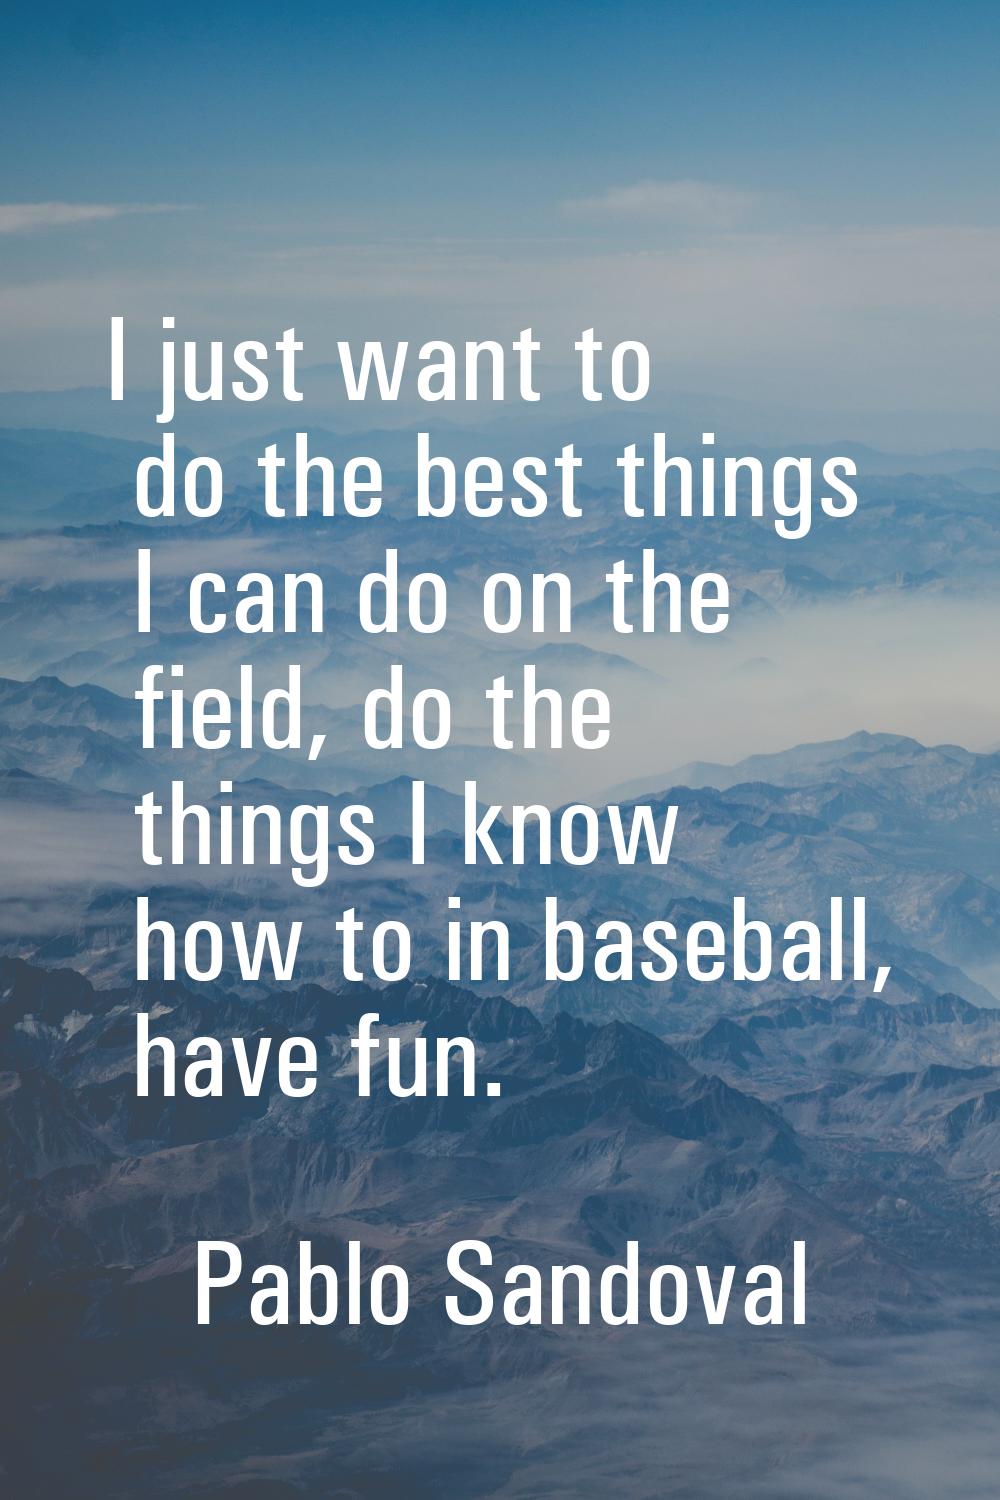 I just want to do the best things I can do on the field, do the things I know how to in baseball, h